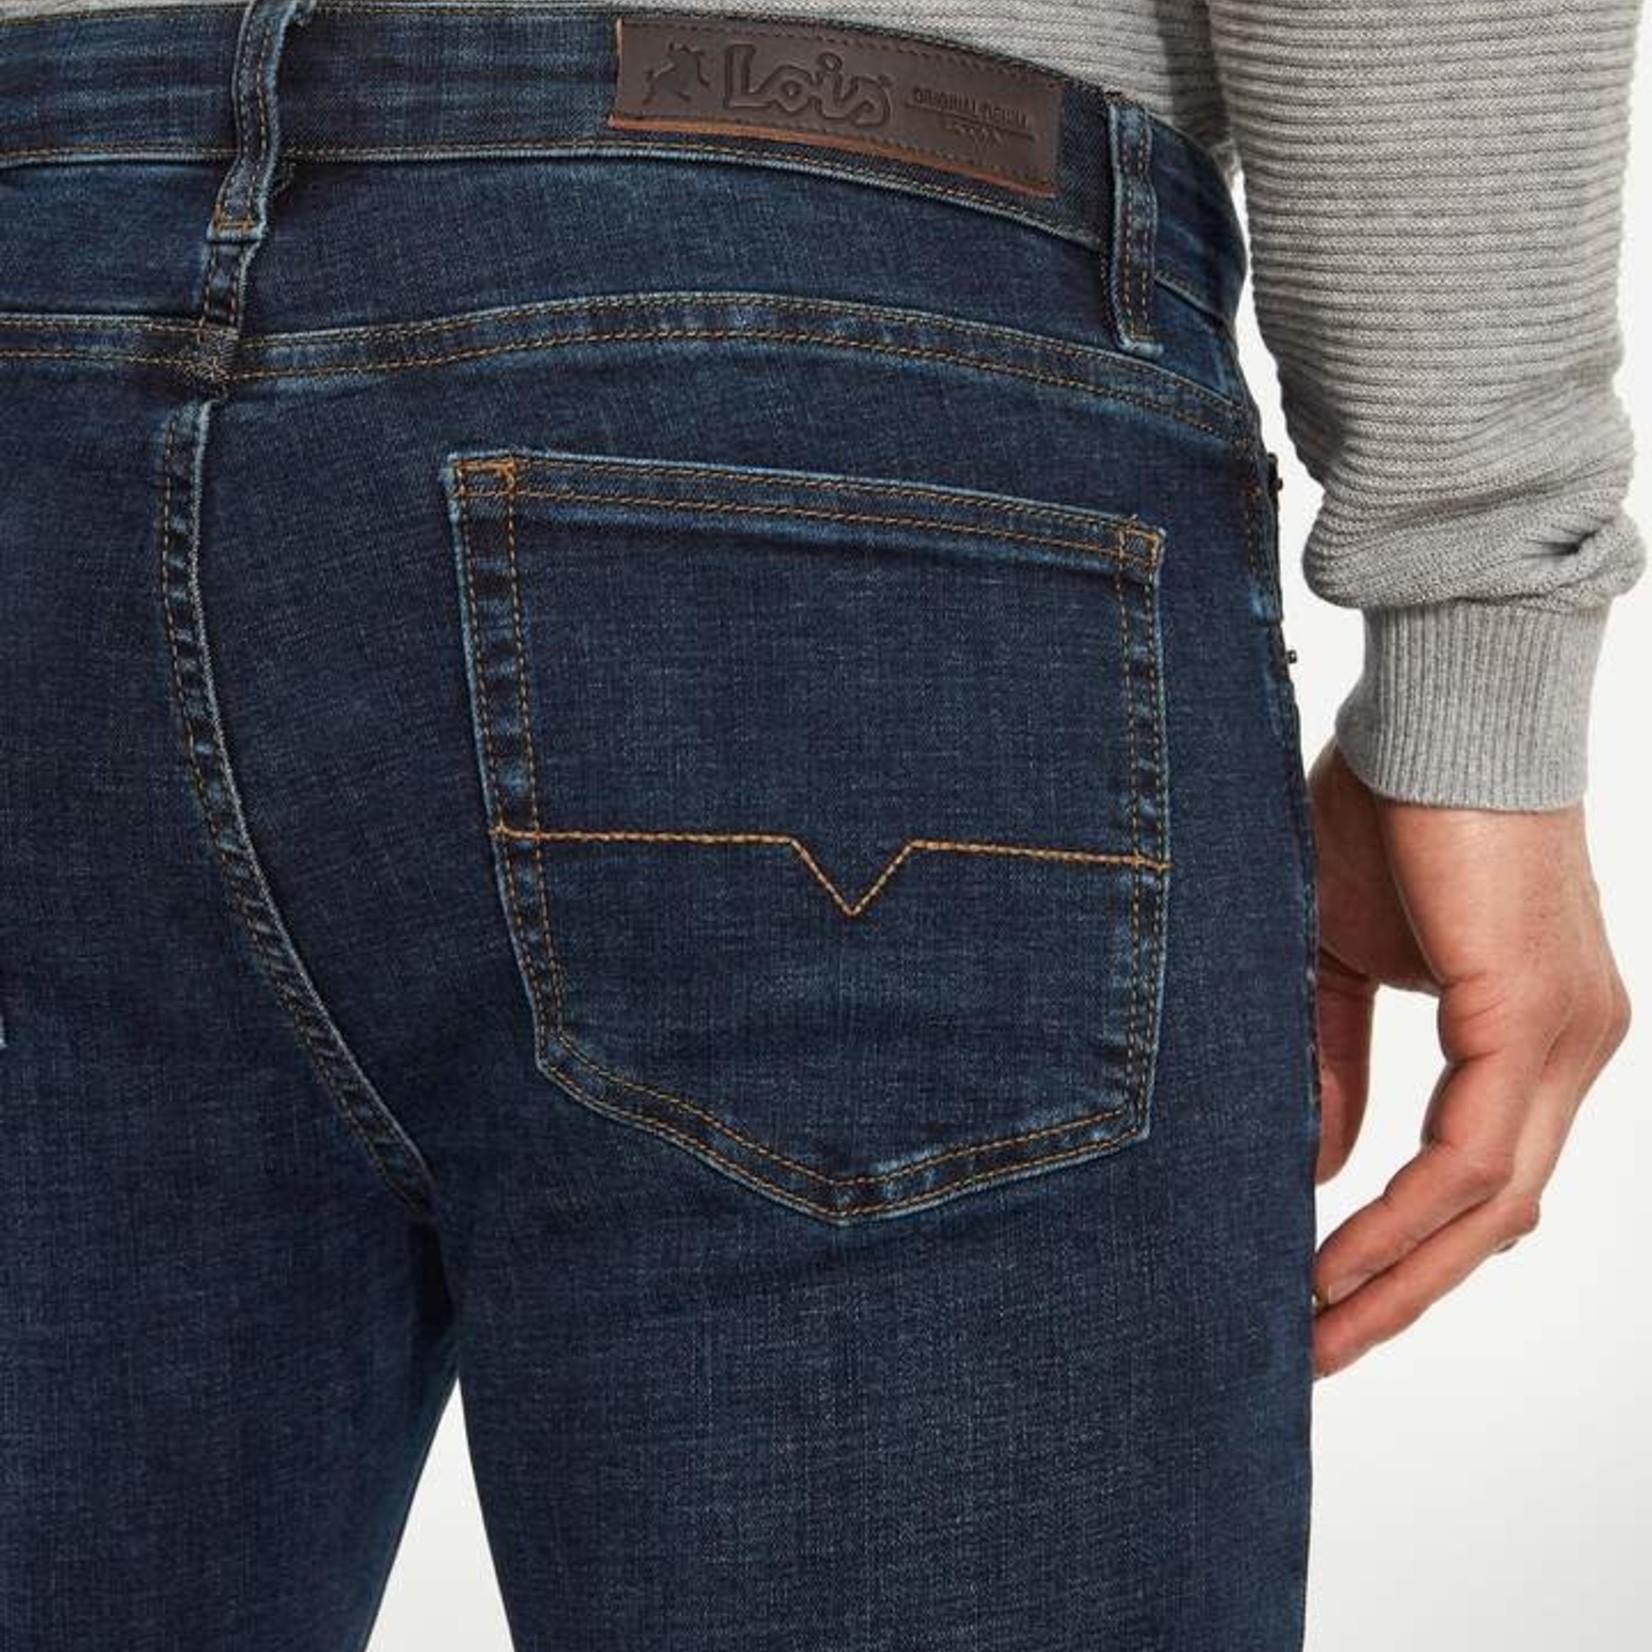 Lois Jeans Canada The "New Star 7142-95" by Lois Jeans